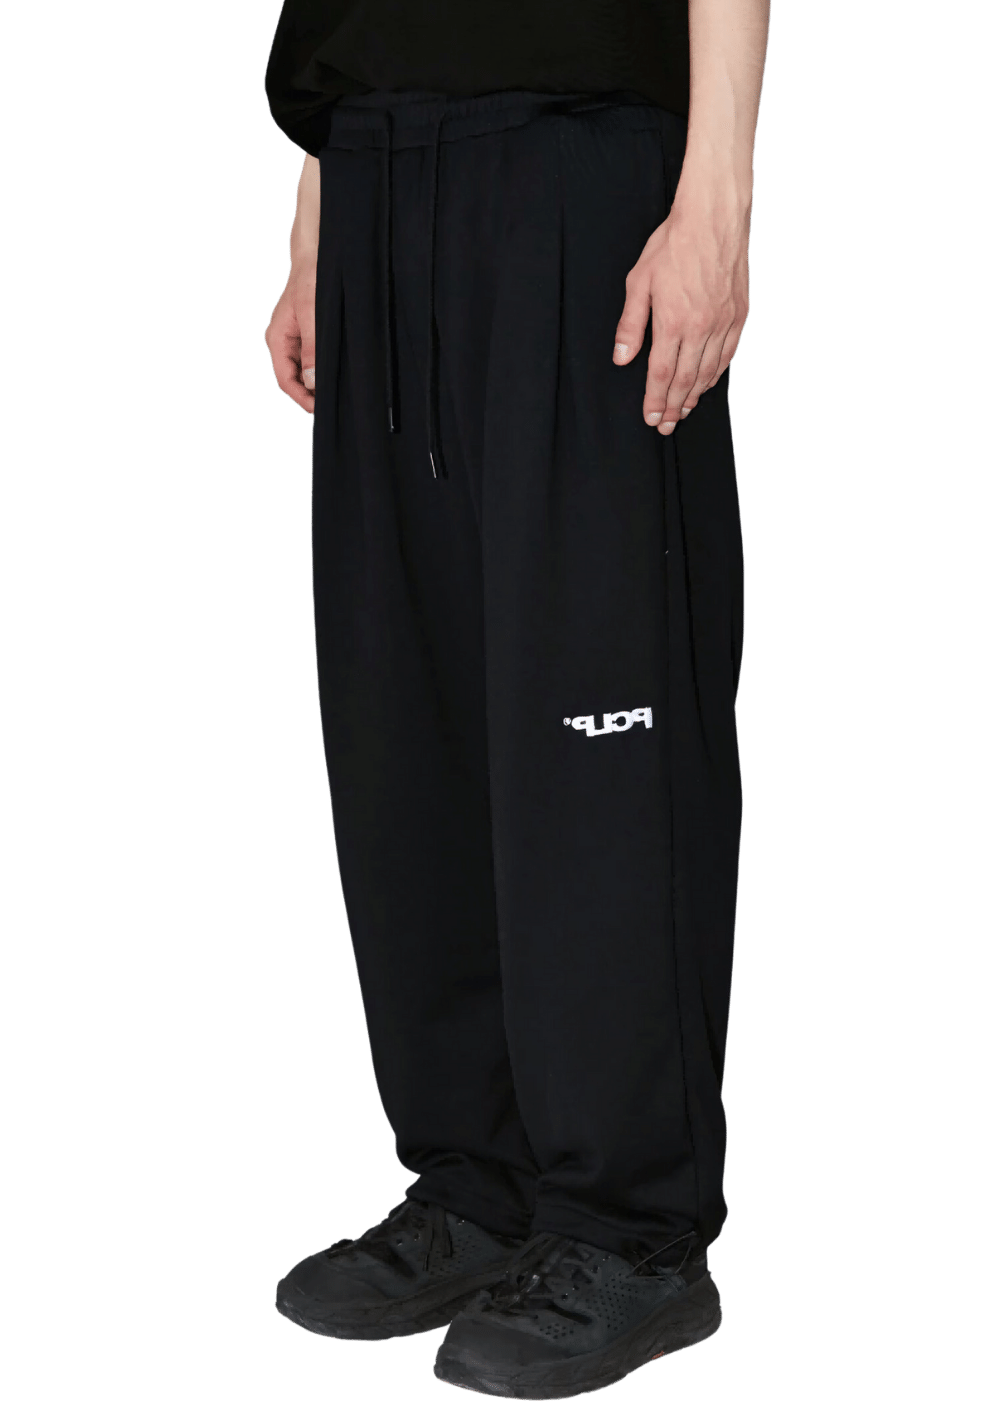 Fleece Lined Tapered Knit Sweatpants - PSYLOS 1, Fleece Lined Tapered Knit Sweatpants, Pants, PCLP, PSYLOS 1